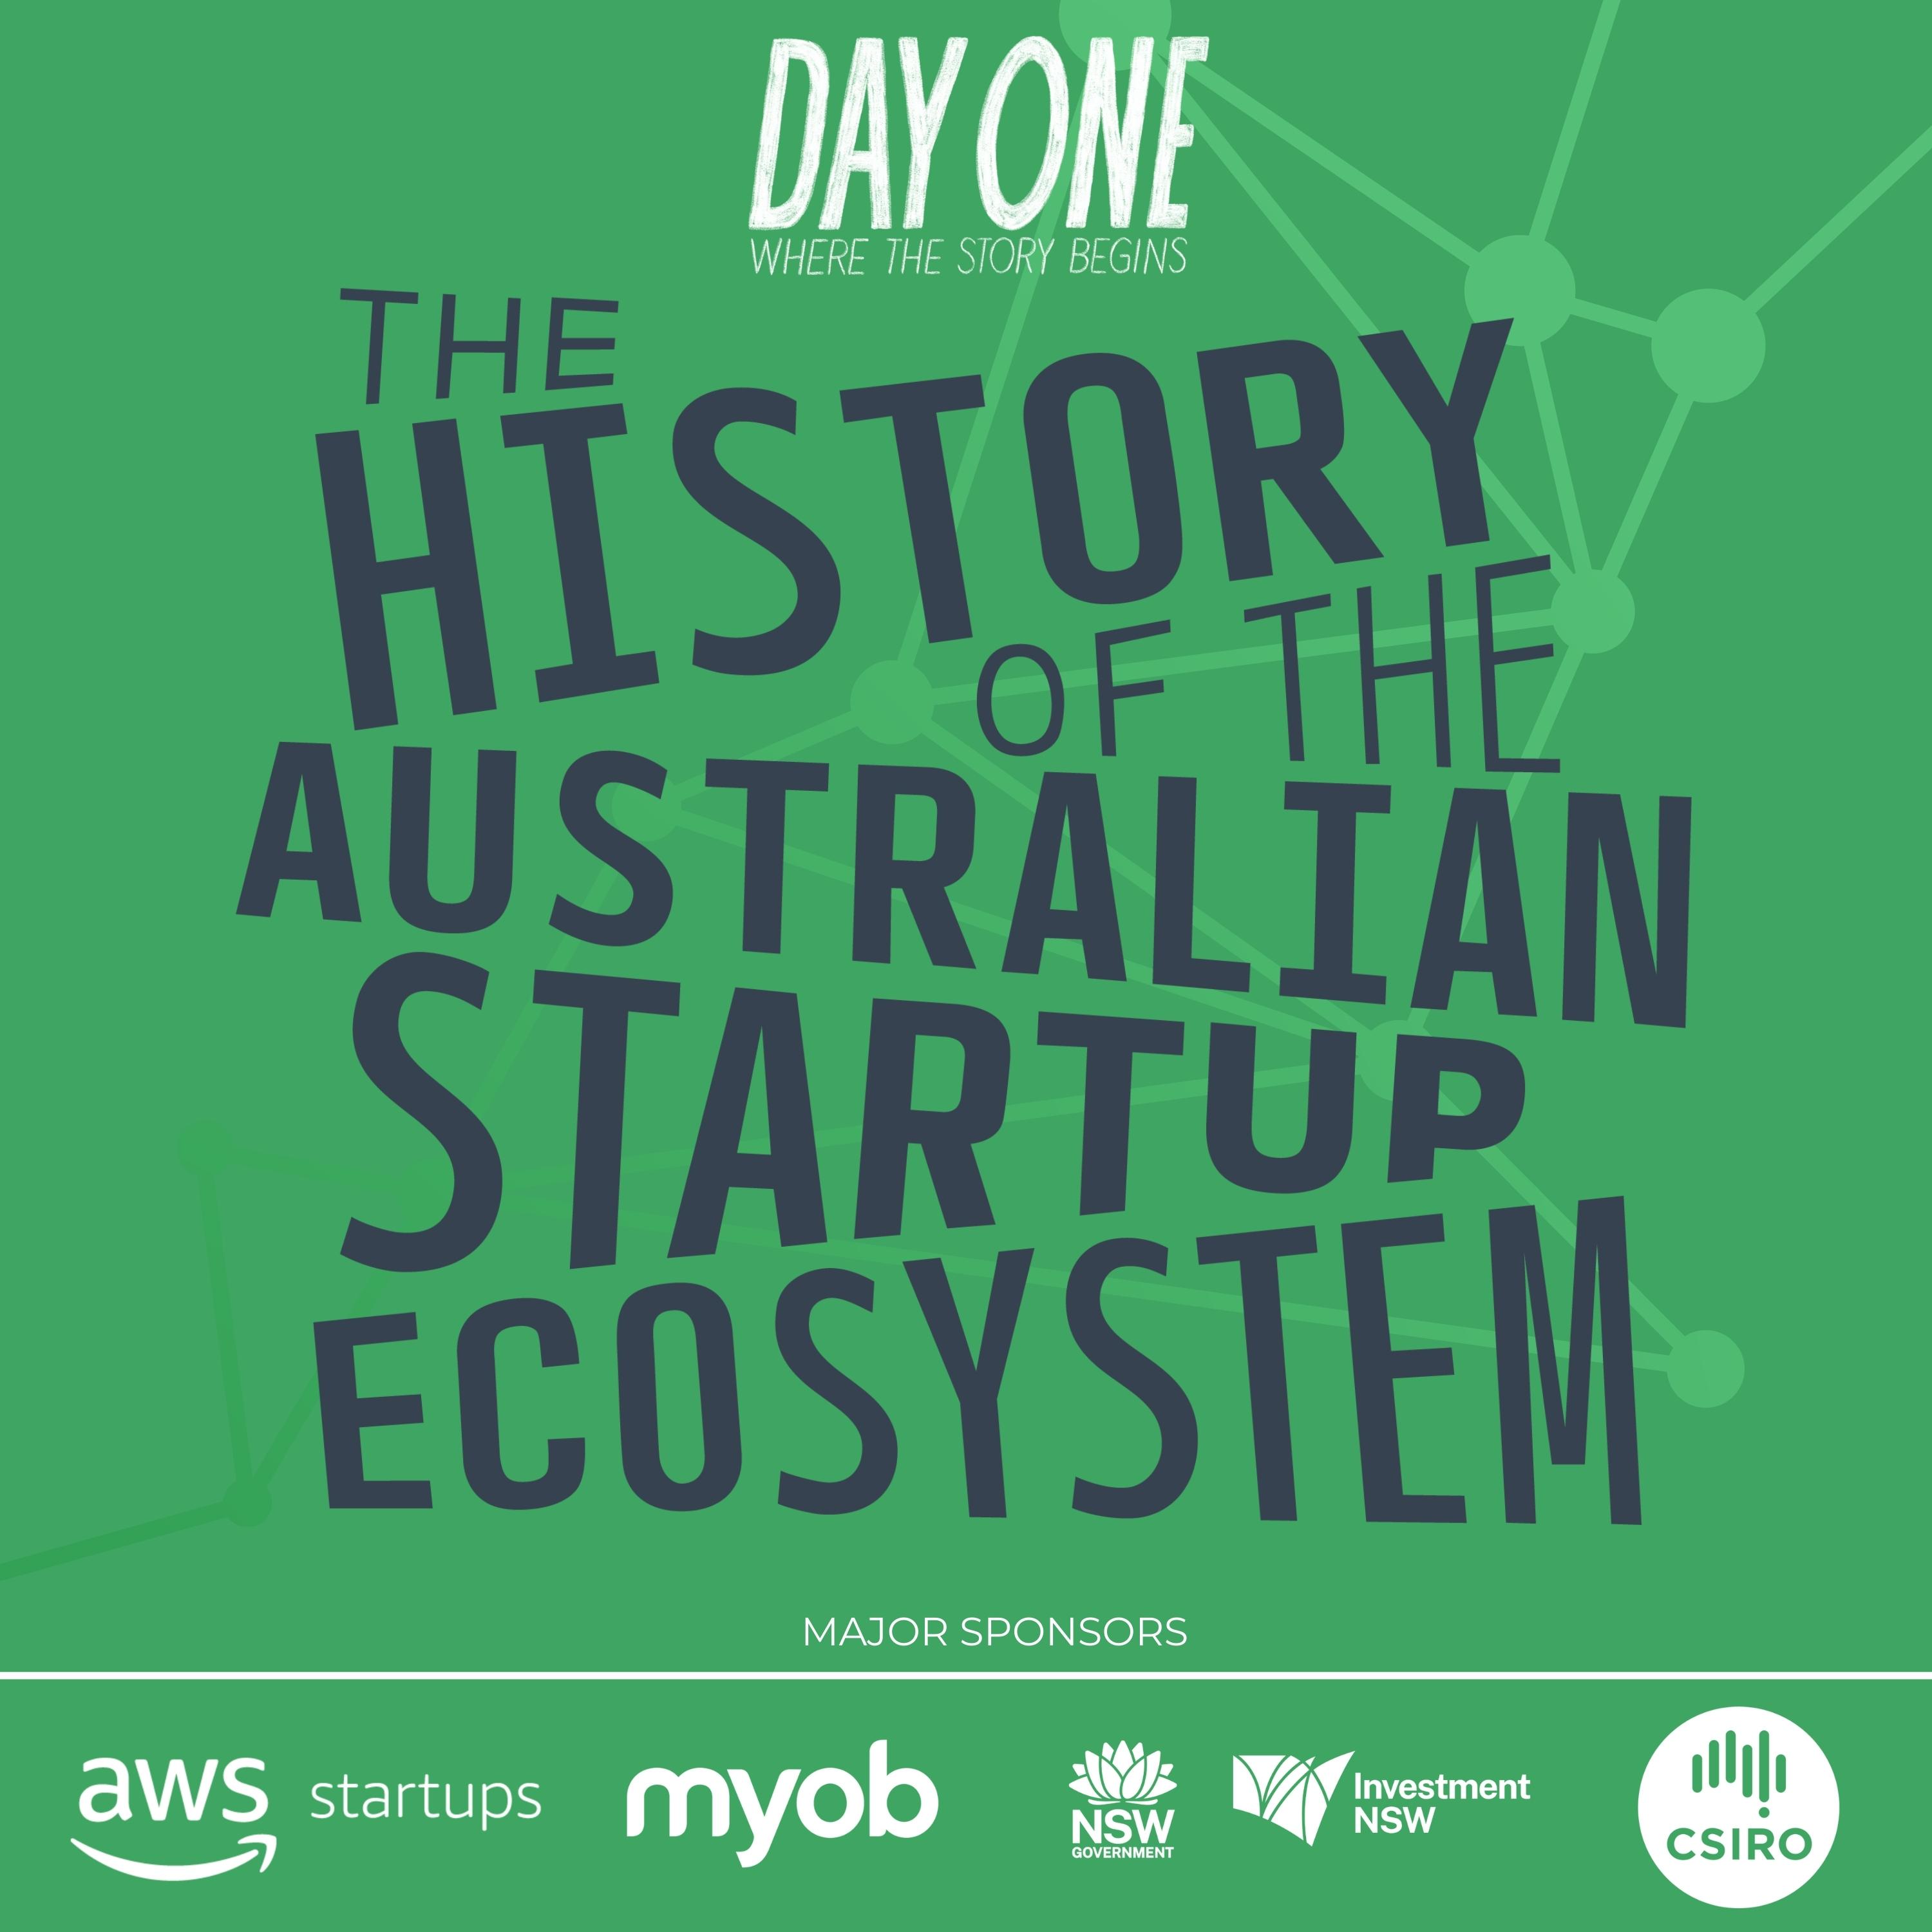 Artwork for podcast The History of the Australian Startup Ecosystem: The Documentary